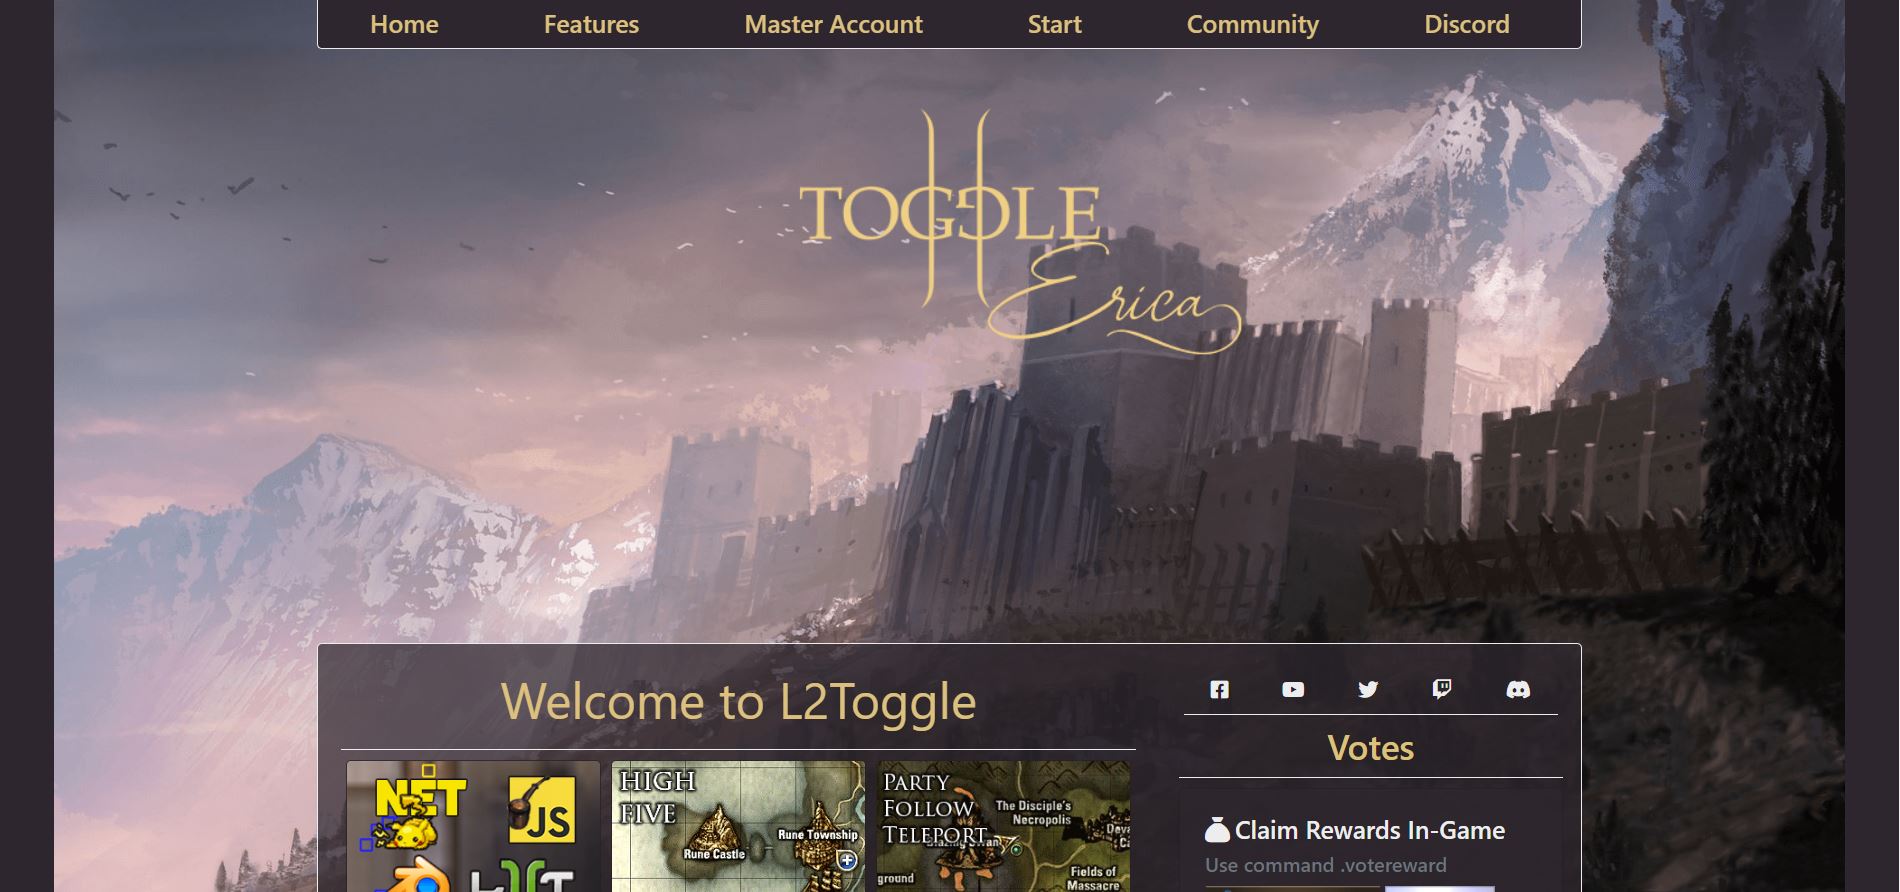 🌟 Lineage2Toggle.com High Five x1: Turn the World 180 Degrees in the New Era! 🔥🛡️